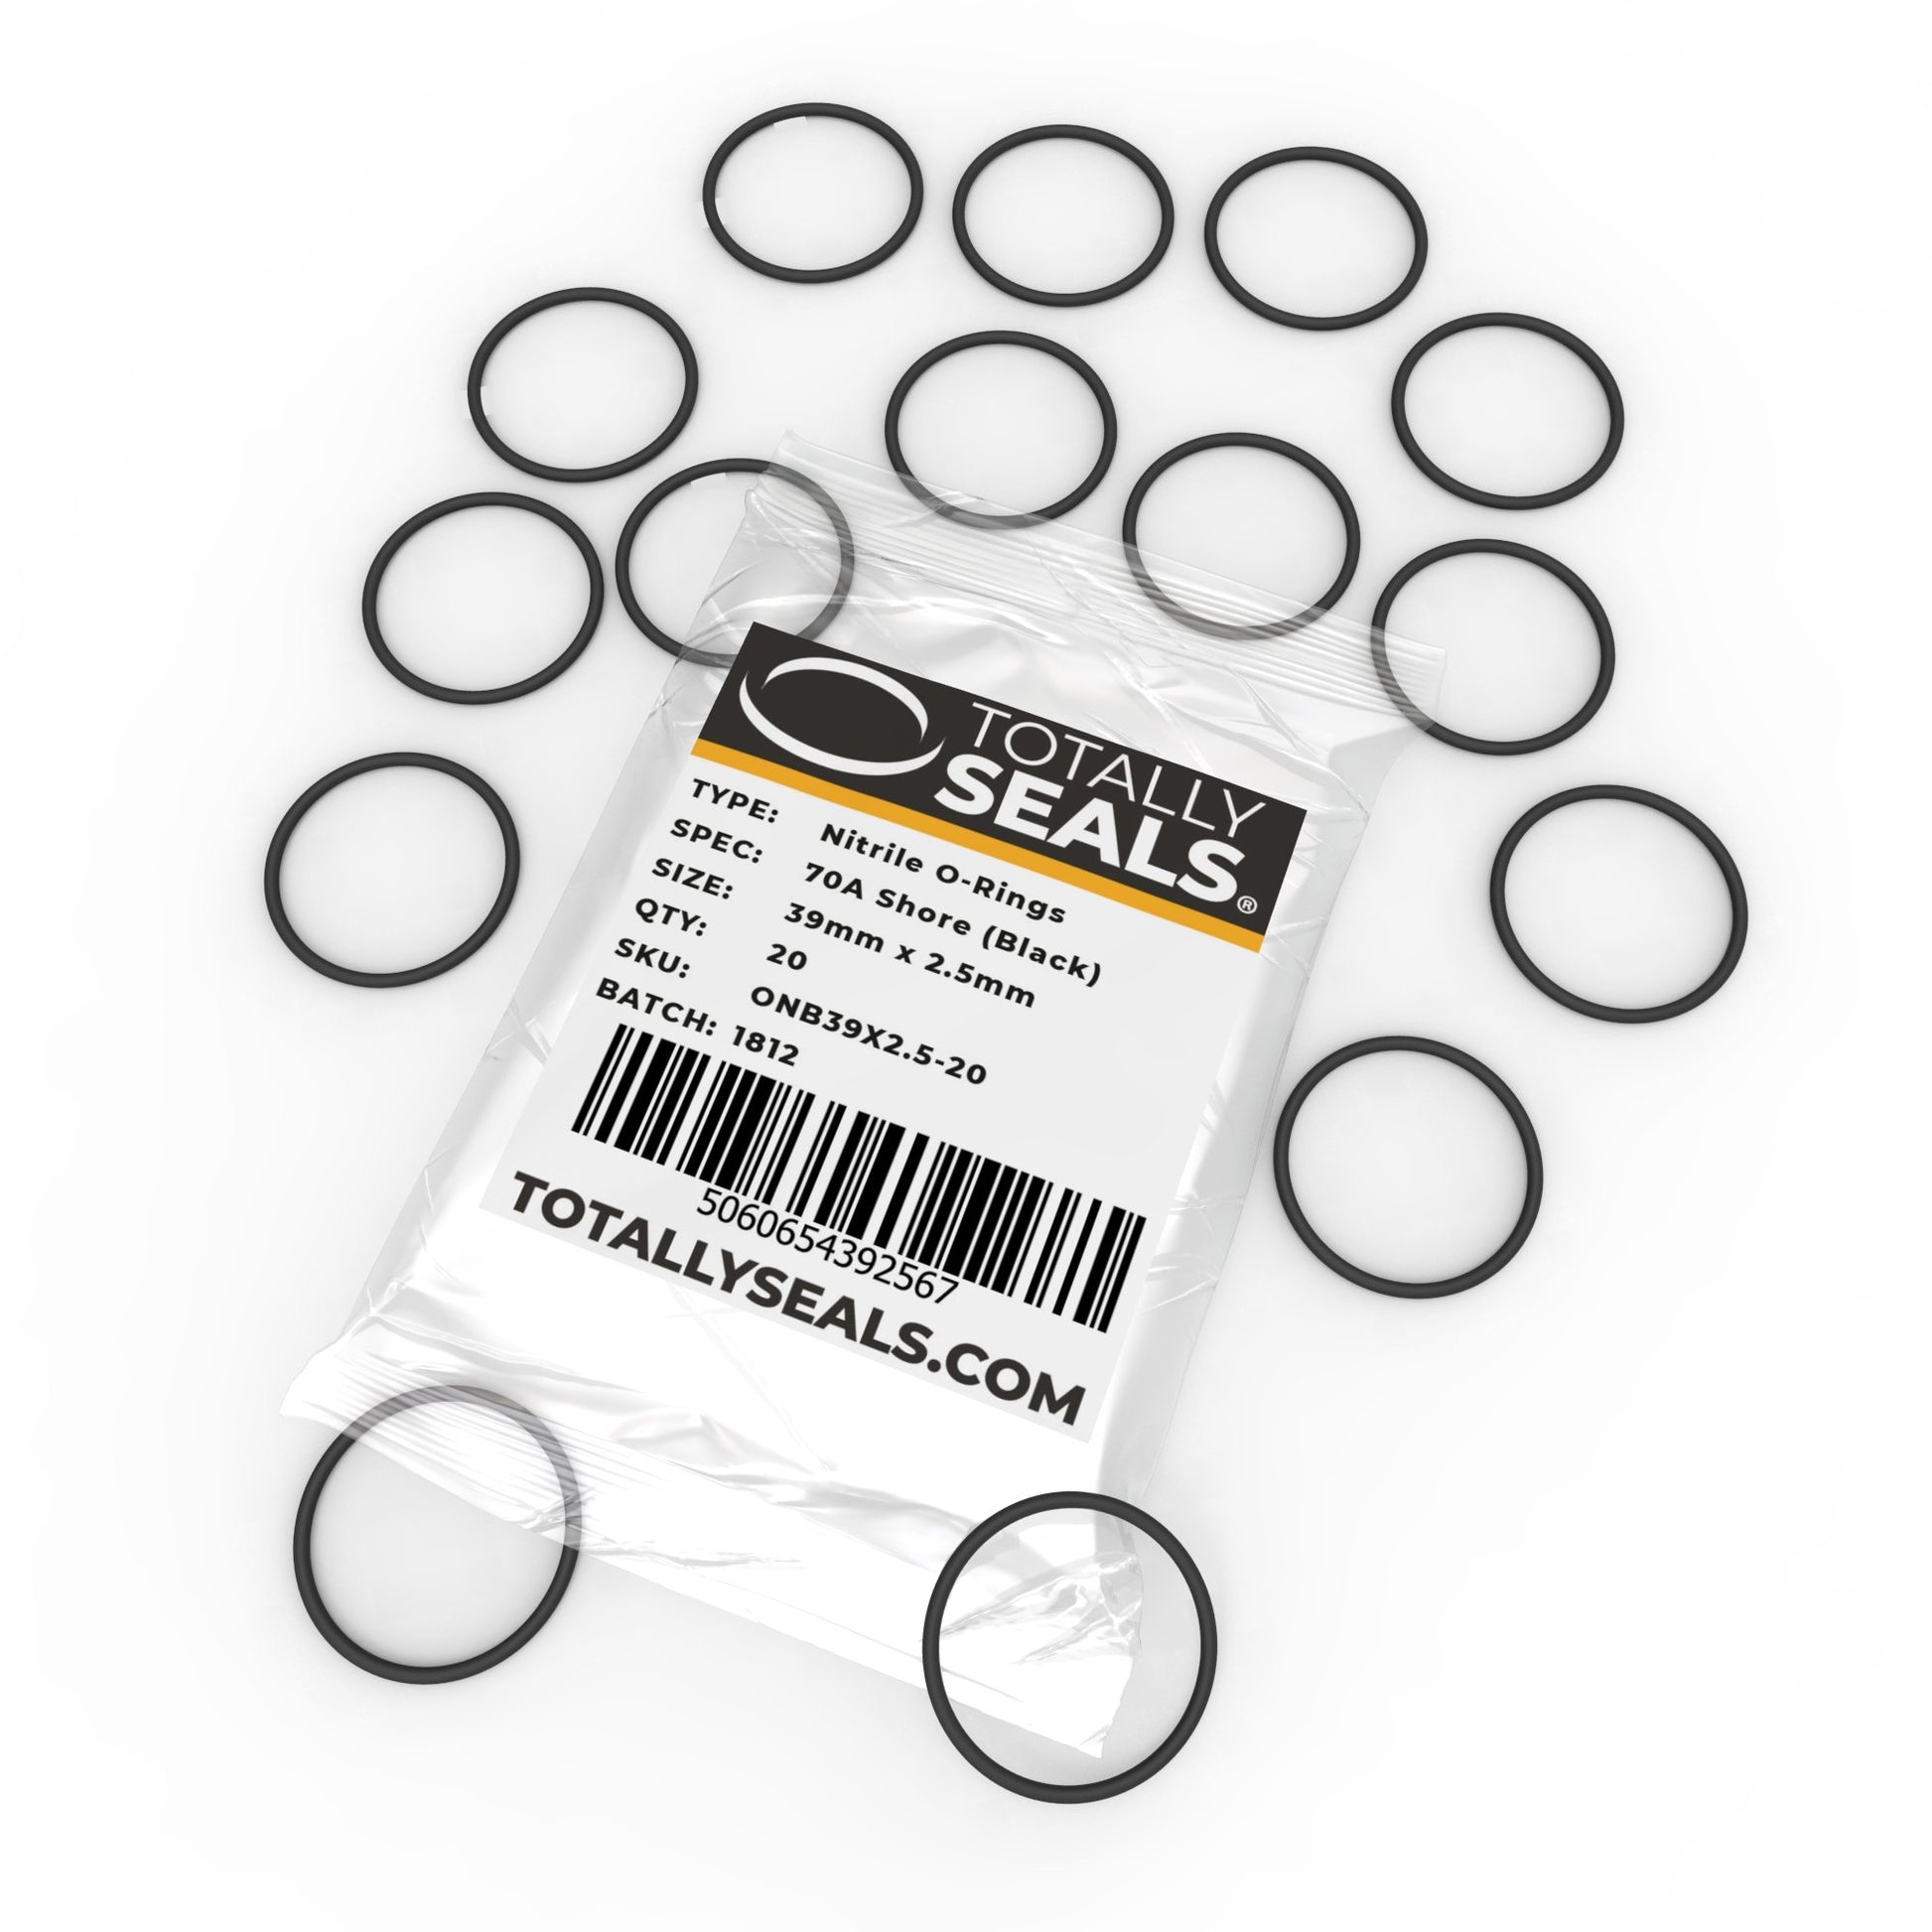 39mm x 2.5mm (44mm OD) Nitrile O-Rings - Totally Seals®